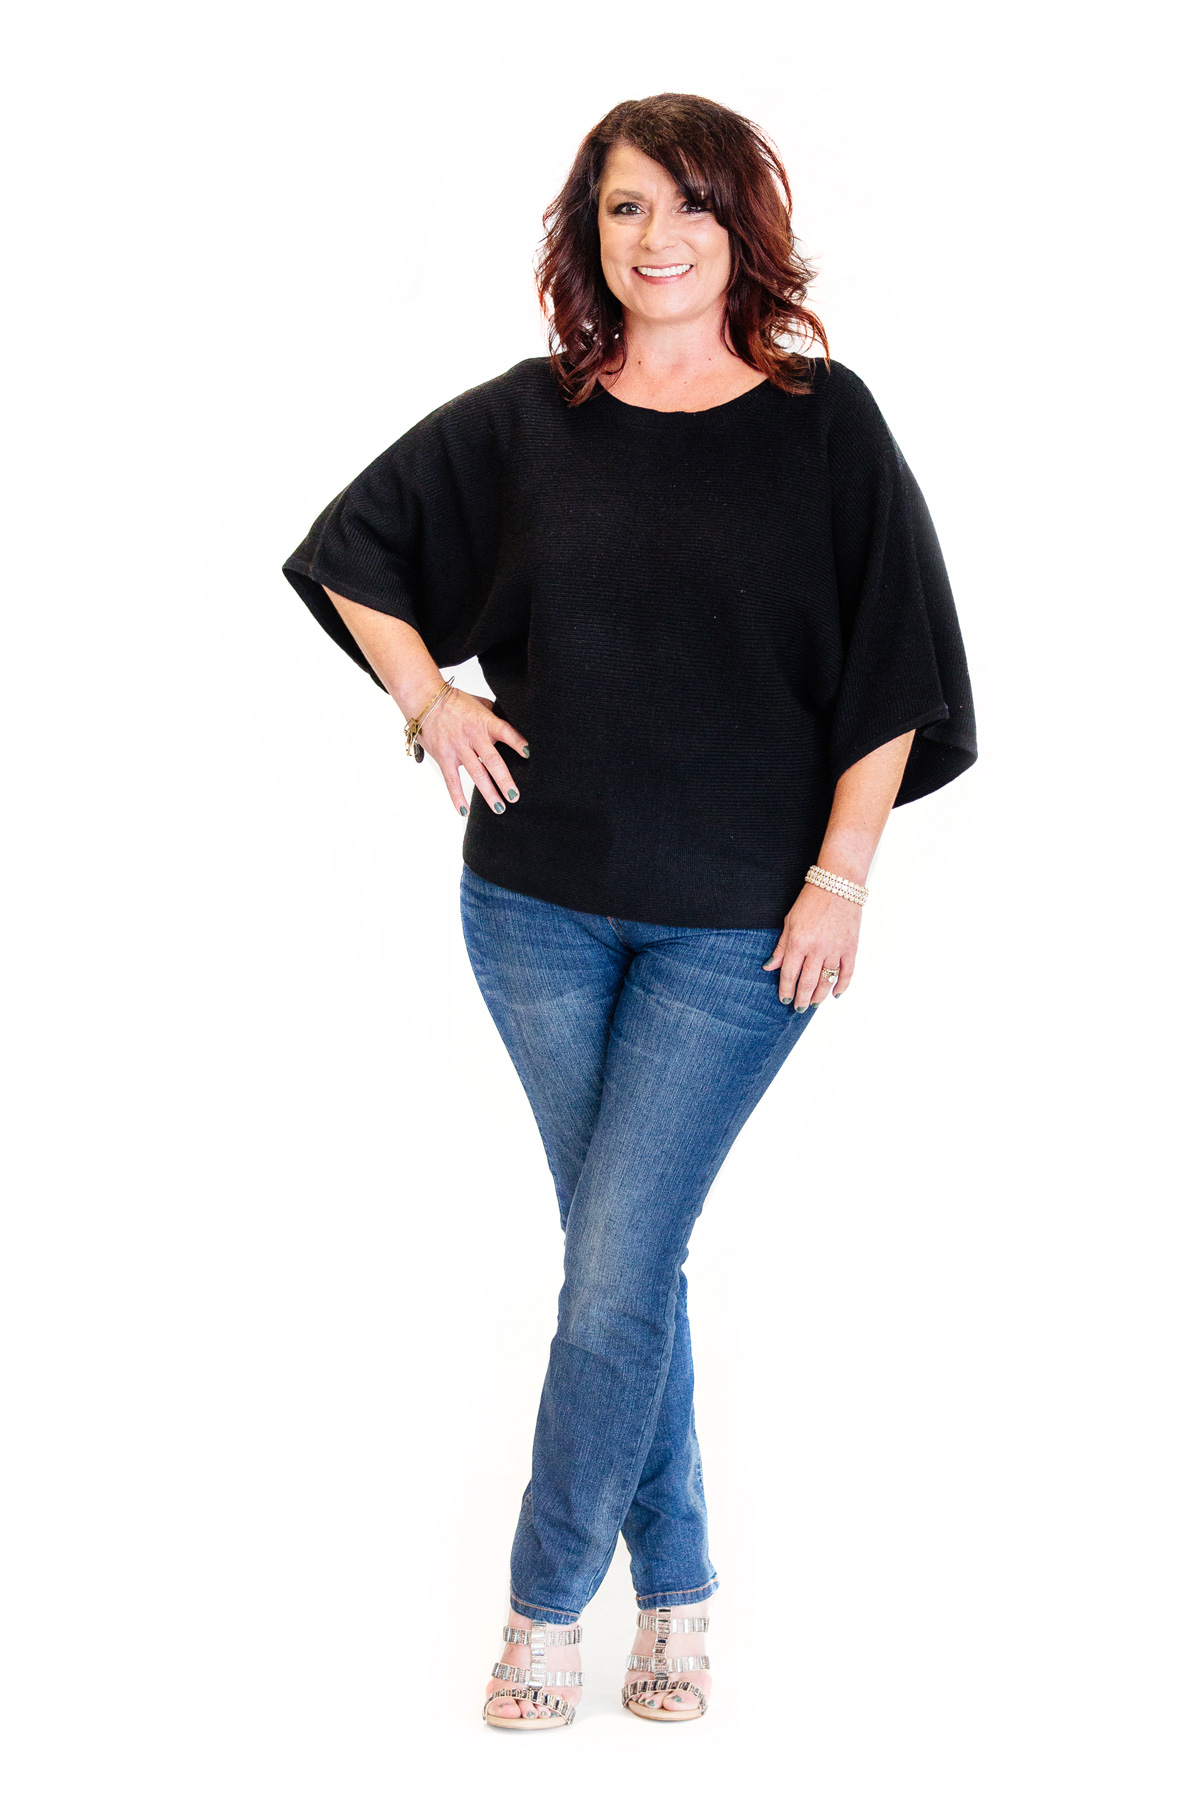 B105 radio personality Chelsie wearing a black top and jeans for her blog with Healthspirations.